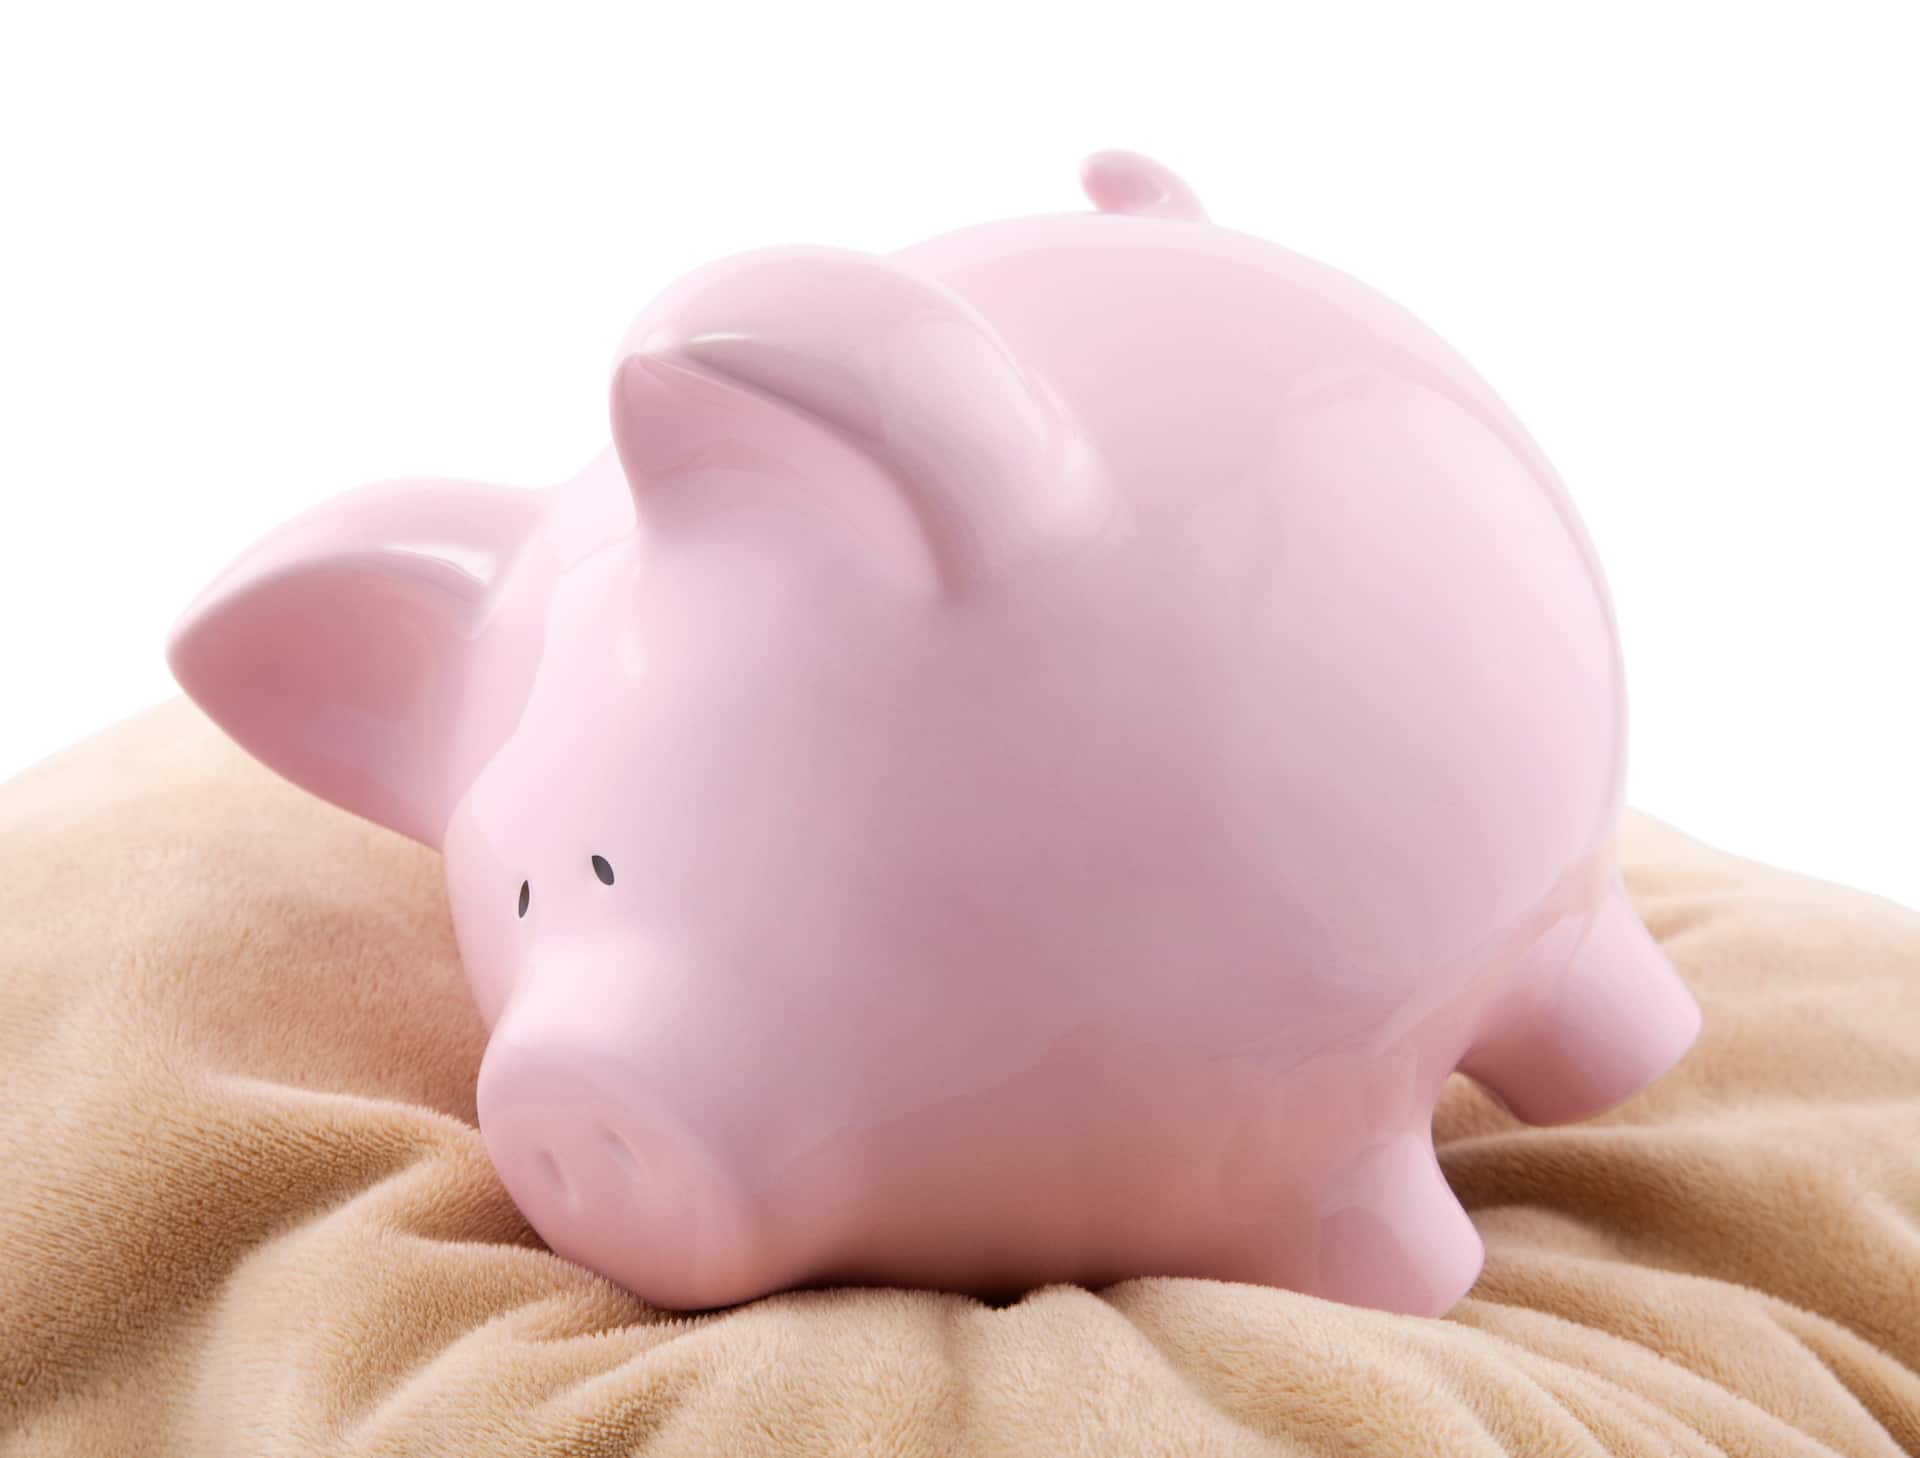 Cute Pink Piggy Bank on Soft Pillow - Symbol of Financial Security and Savings